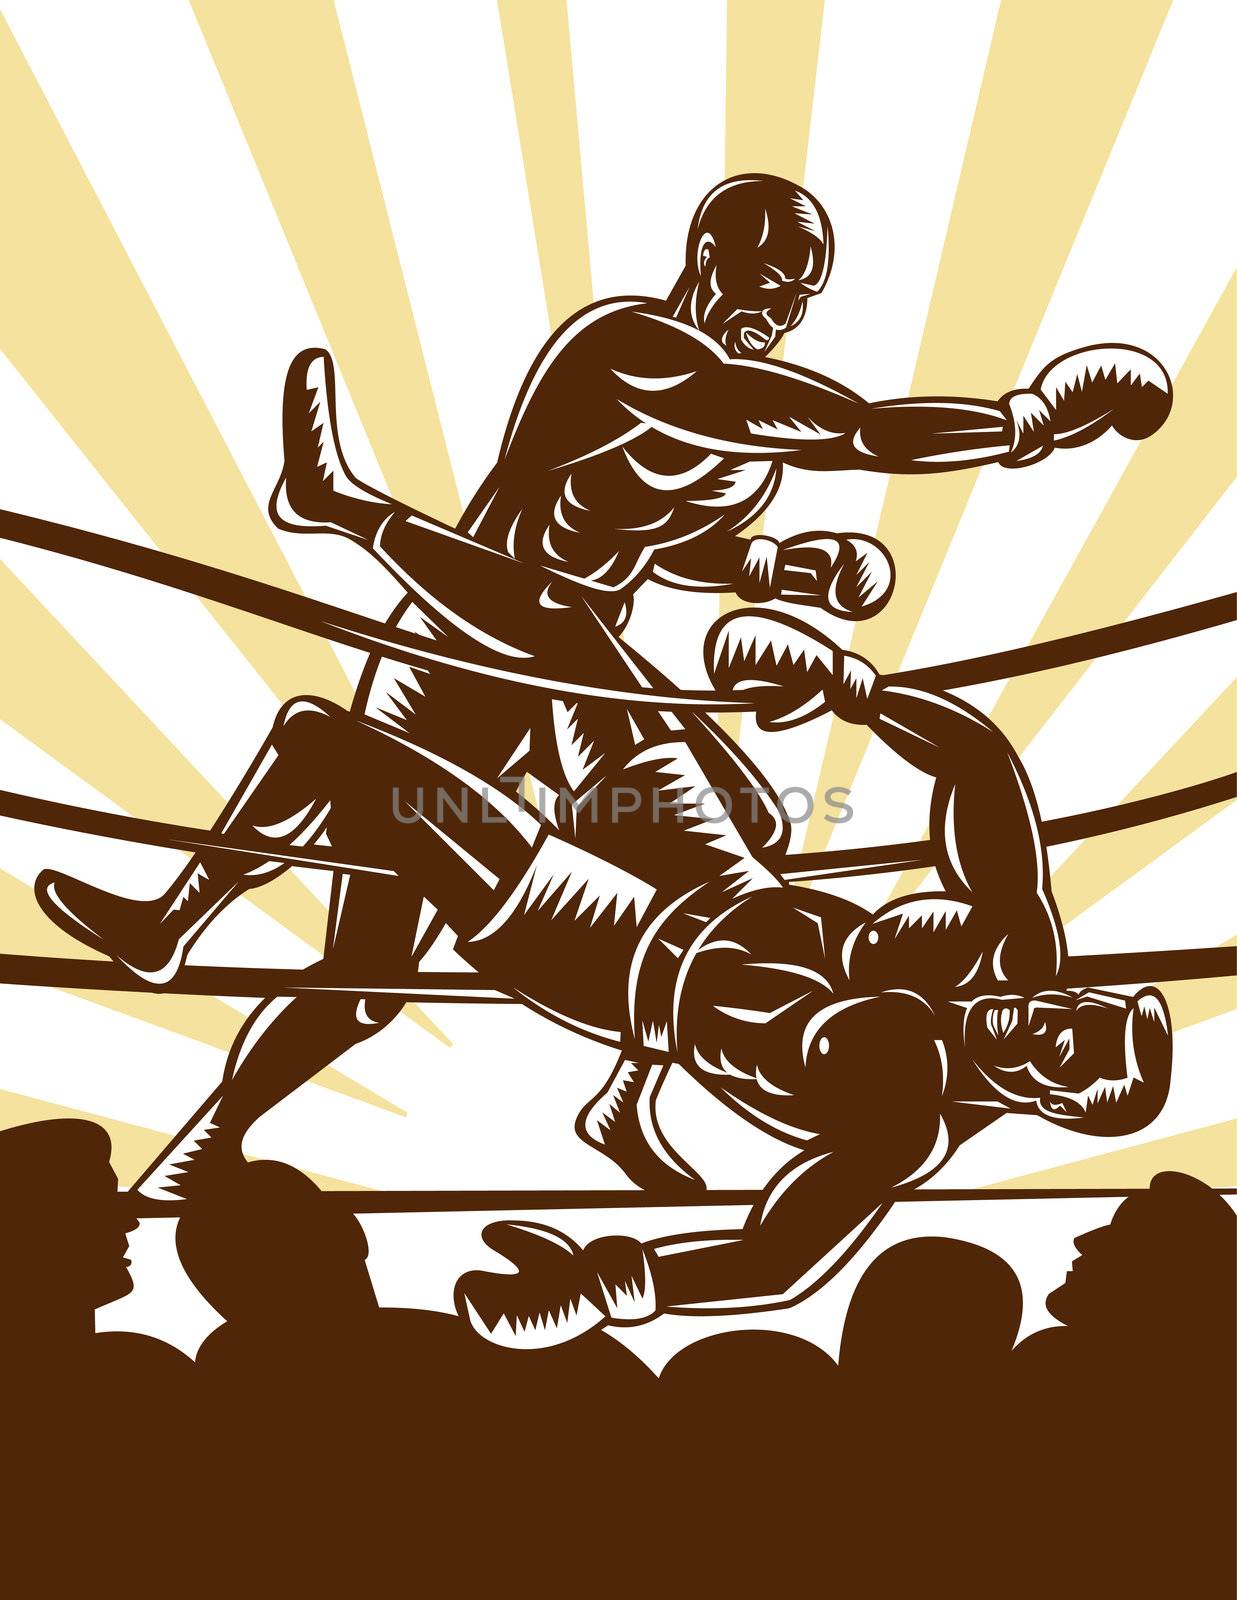 illustration of a Boxer knocking out opponent out of boxing ring